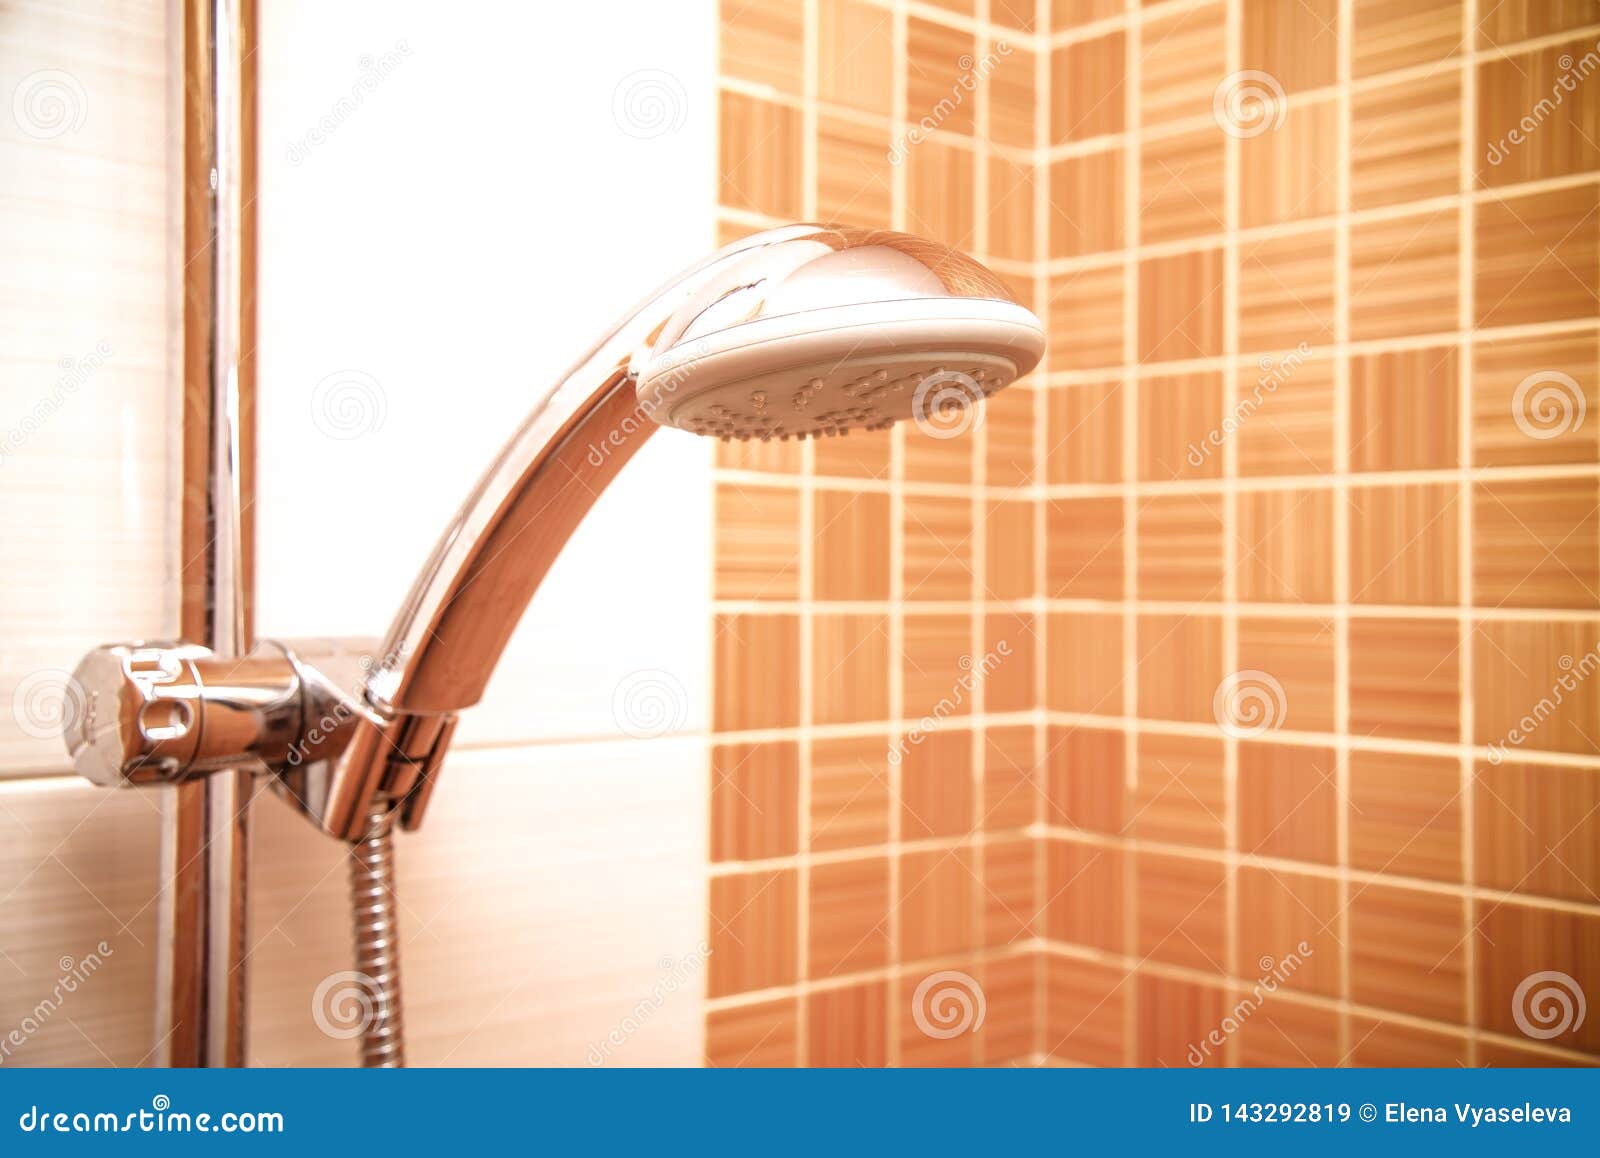 Fresh Shower Where Water Running From Shower Head And Faucet In